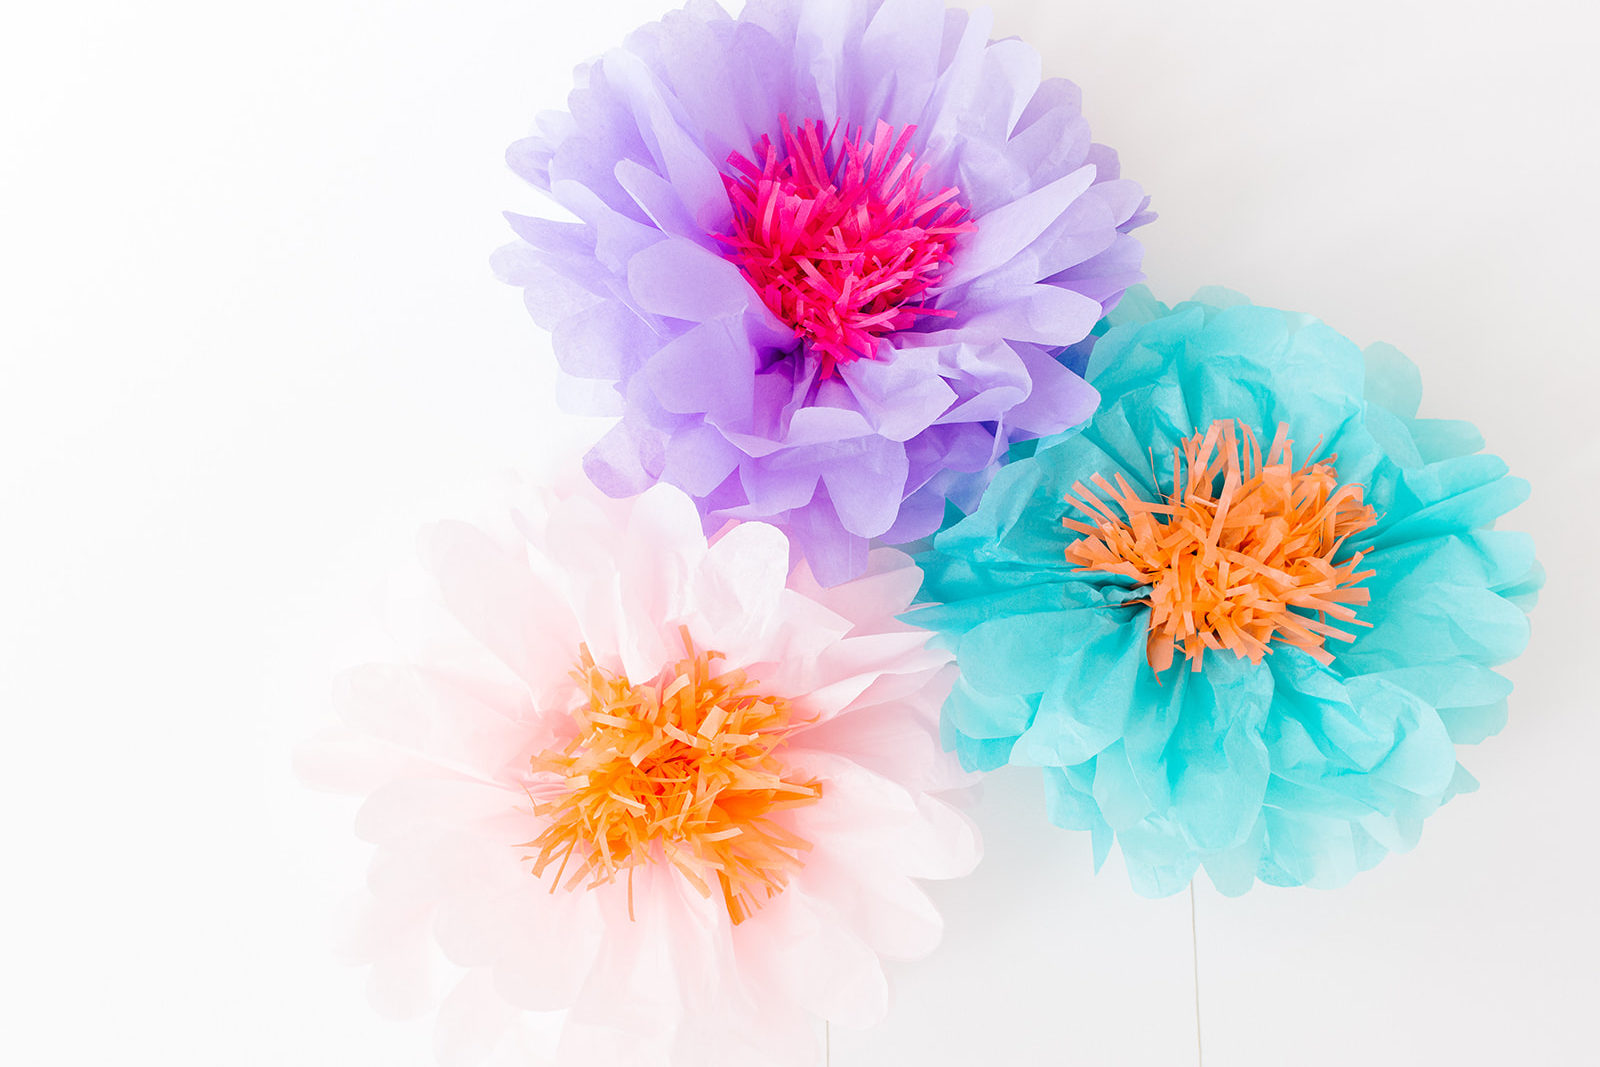 How To Make Tissue Paper Flowers - TGIF - This Grandma is Fun